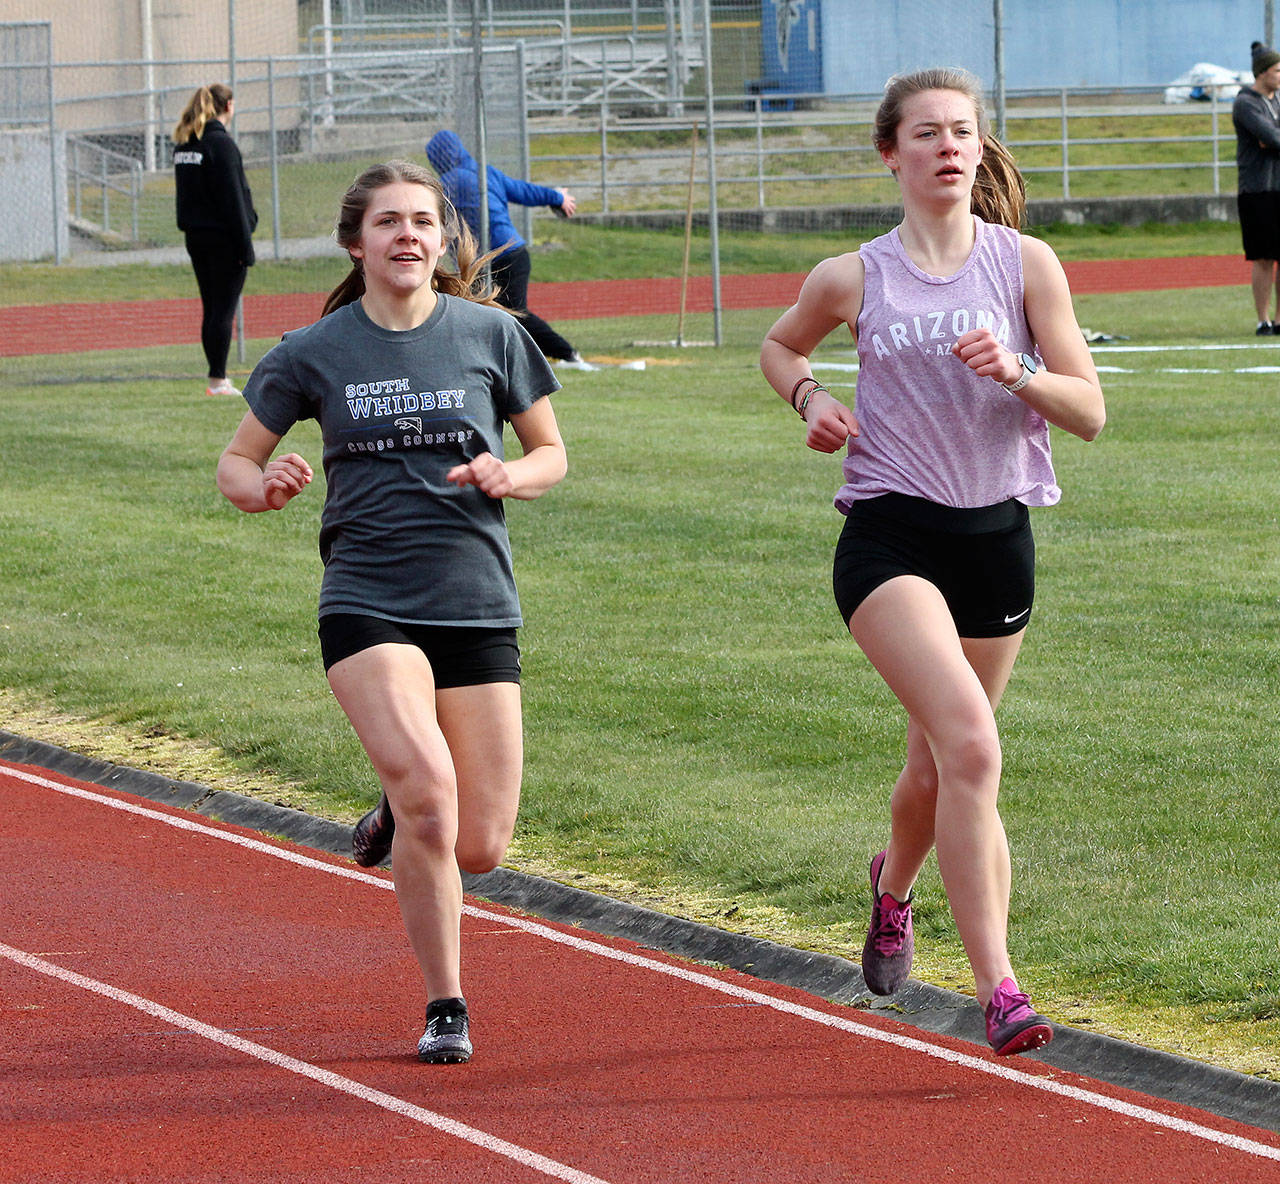 The 1,600 and 3,200 were run simultaneously Saturday. Grace Huffman, left, won the 1,600, and Kaia Swegler Richmond, right, captured the 3,200.(Photo by Jim Waller/South Whidbey Record)